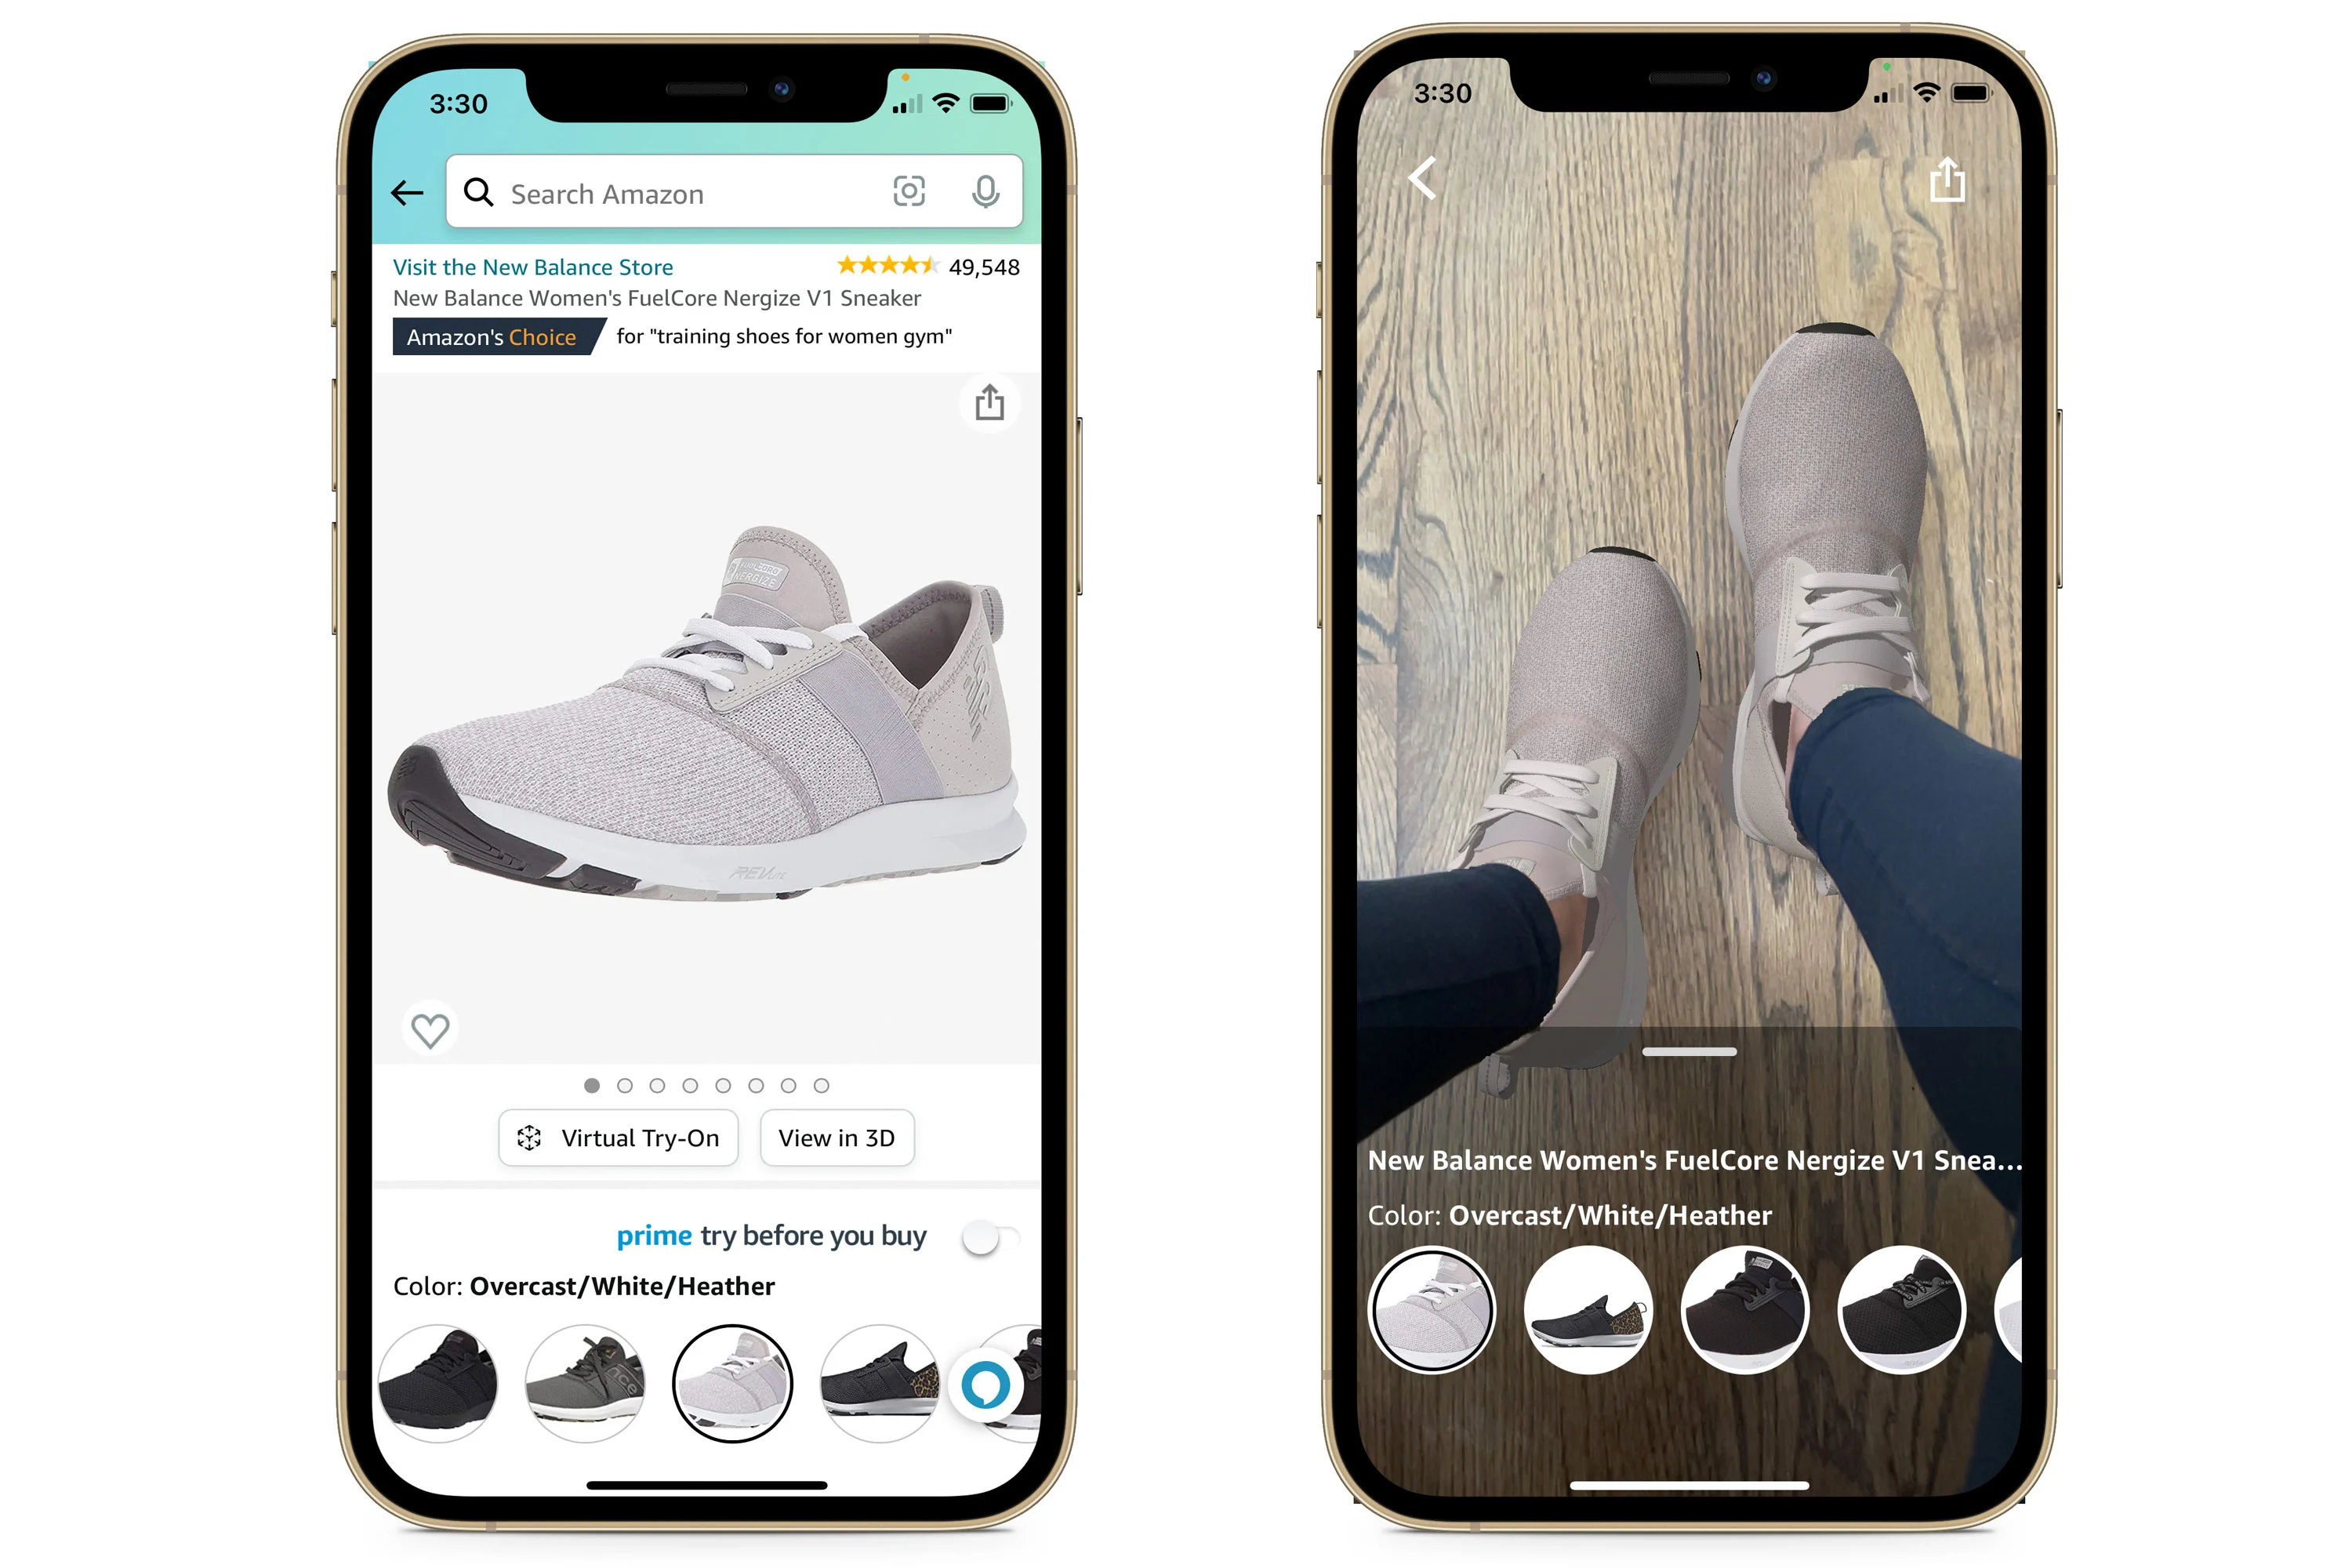 Amazon will let you try on digital versions of shoes you want to buy